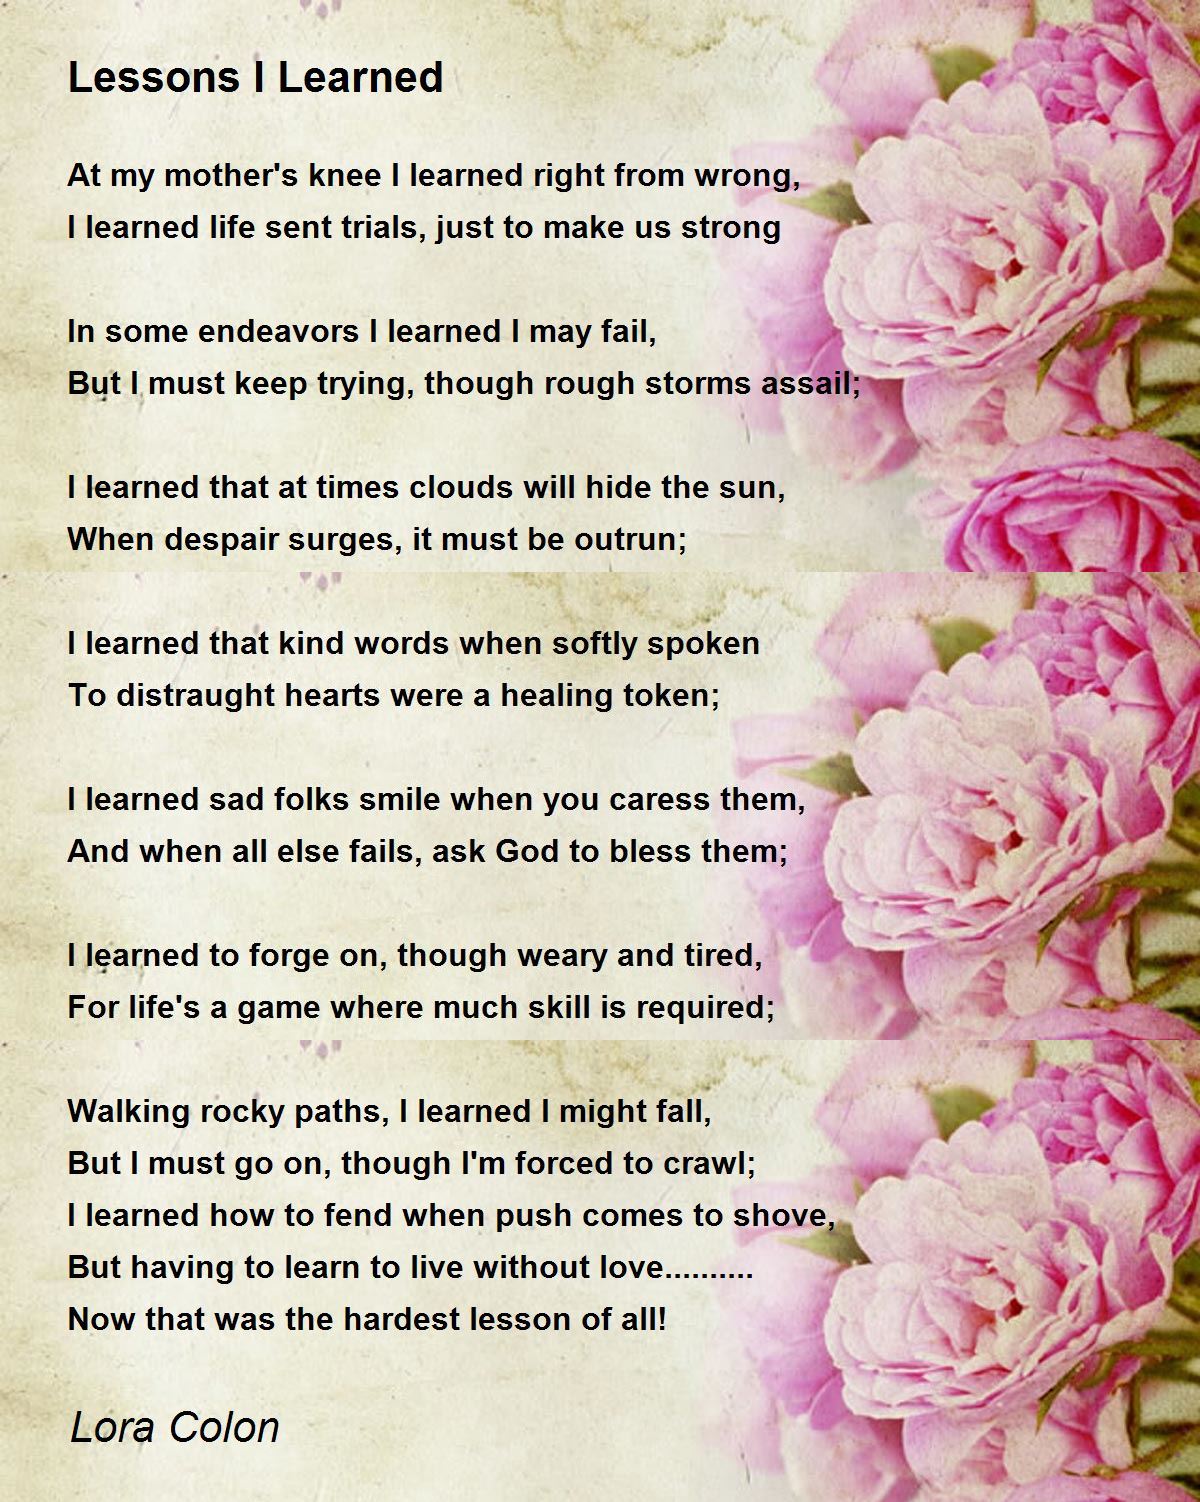 Lessons I Learned - Lessons I Learned Poem by Lora Colon